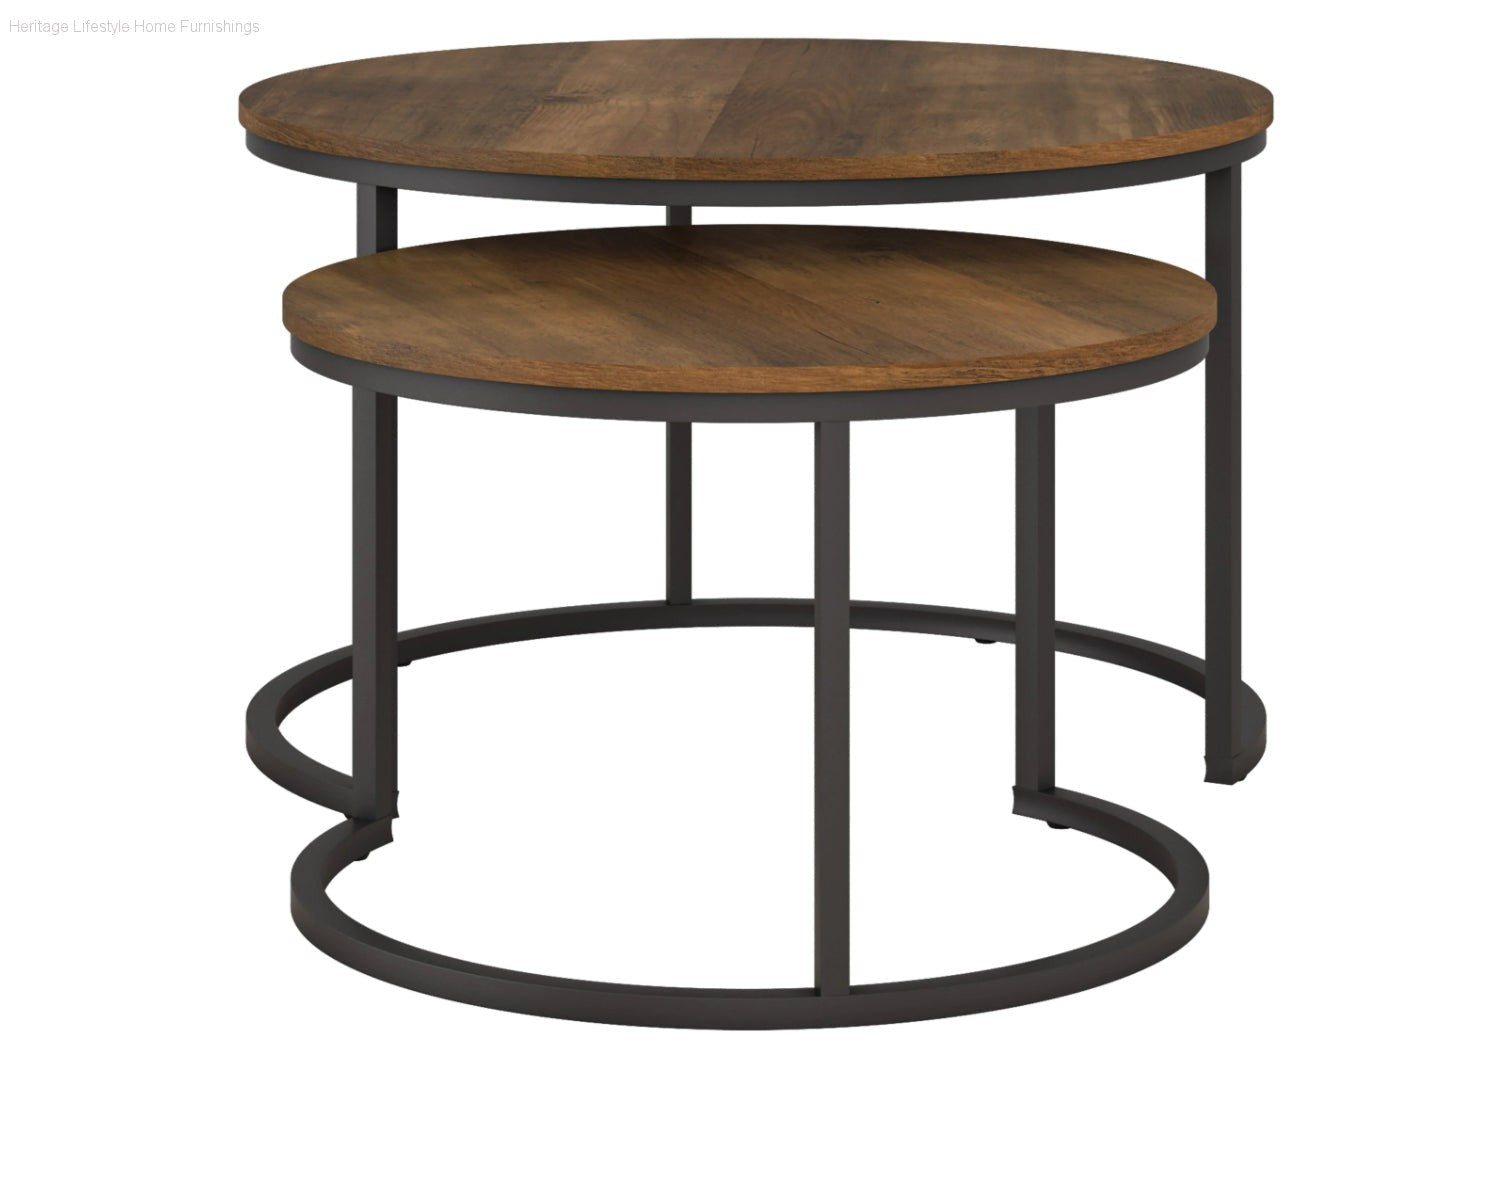 HLHF CL01007 Nesting Coffee Tables Occasional Furniture Store Burlington Ontario Near Me 